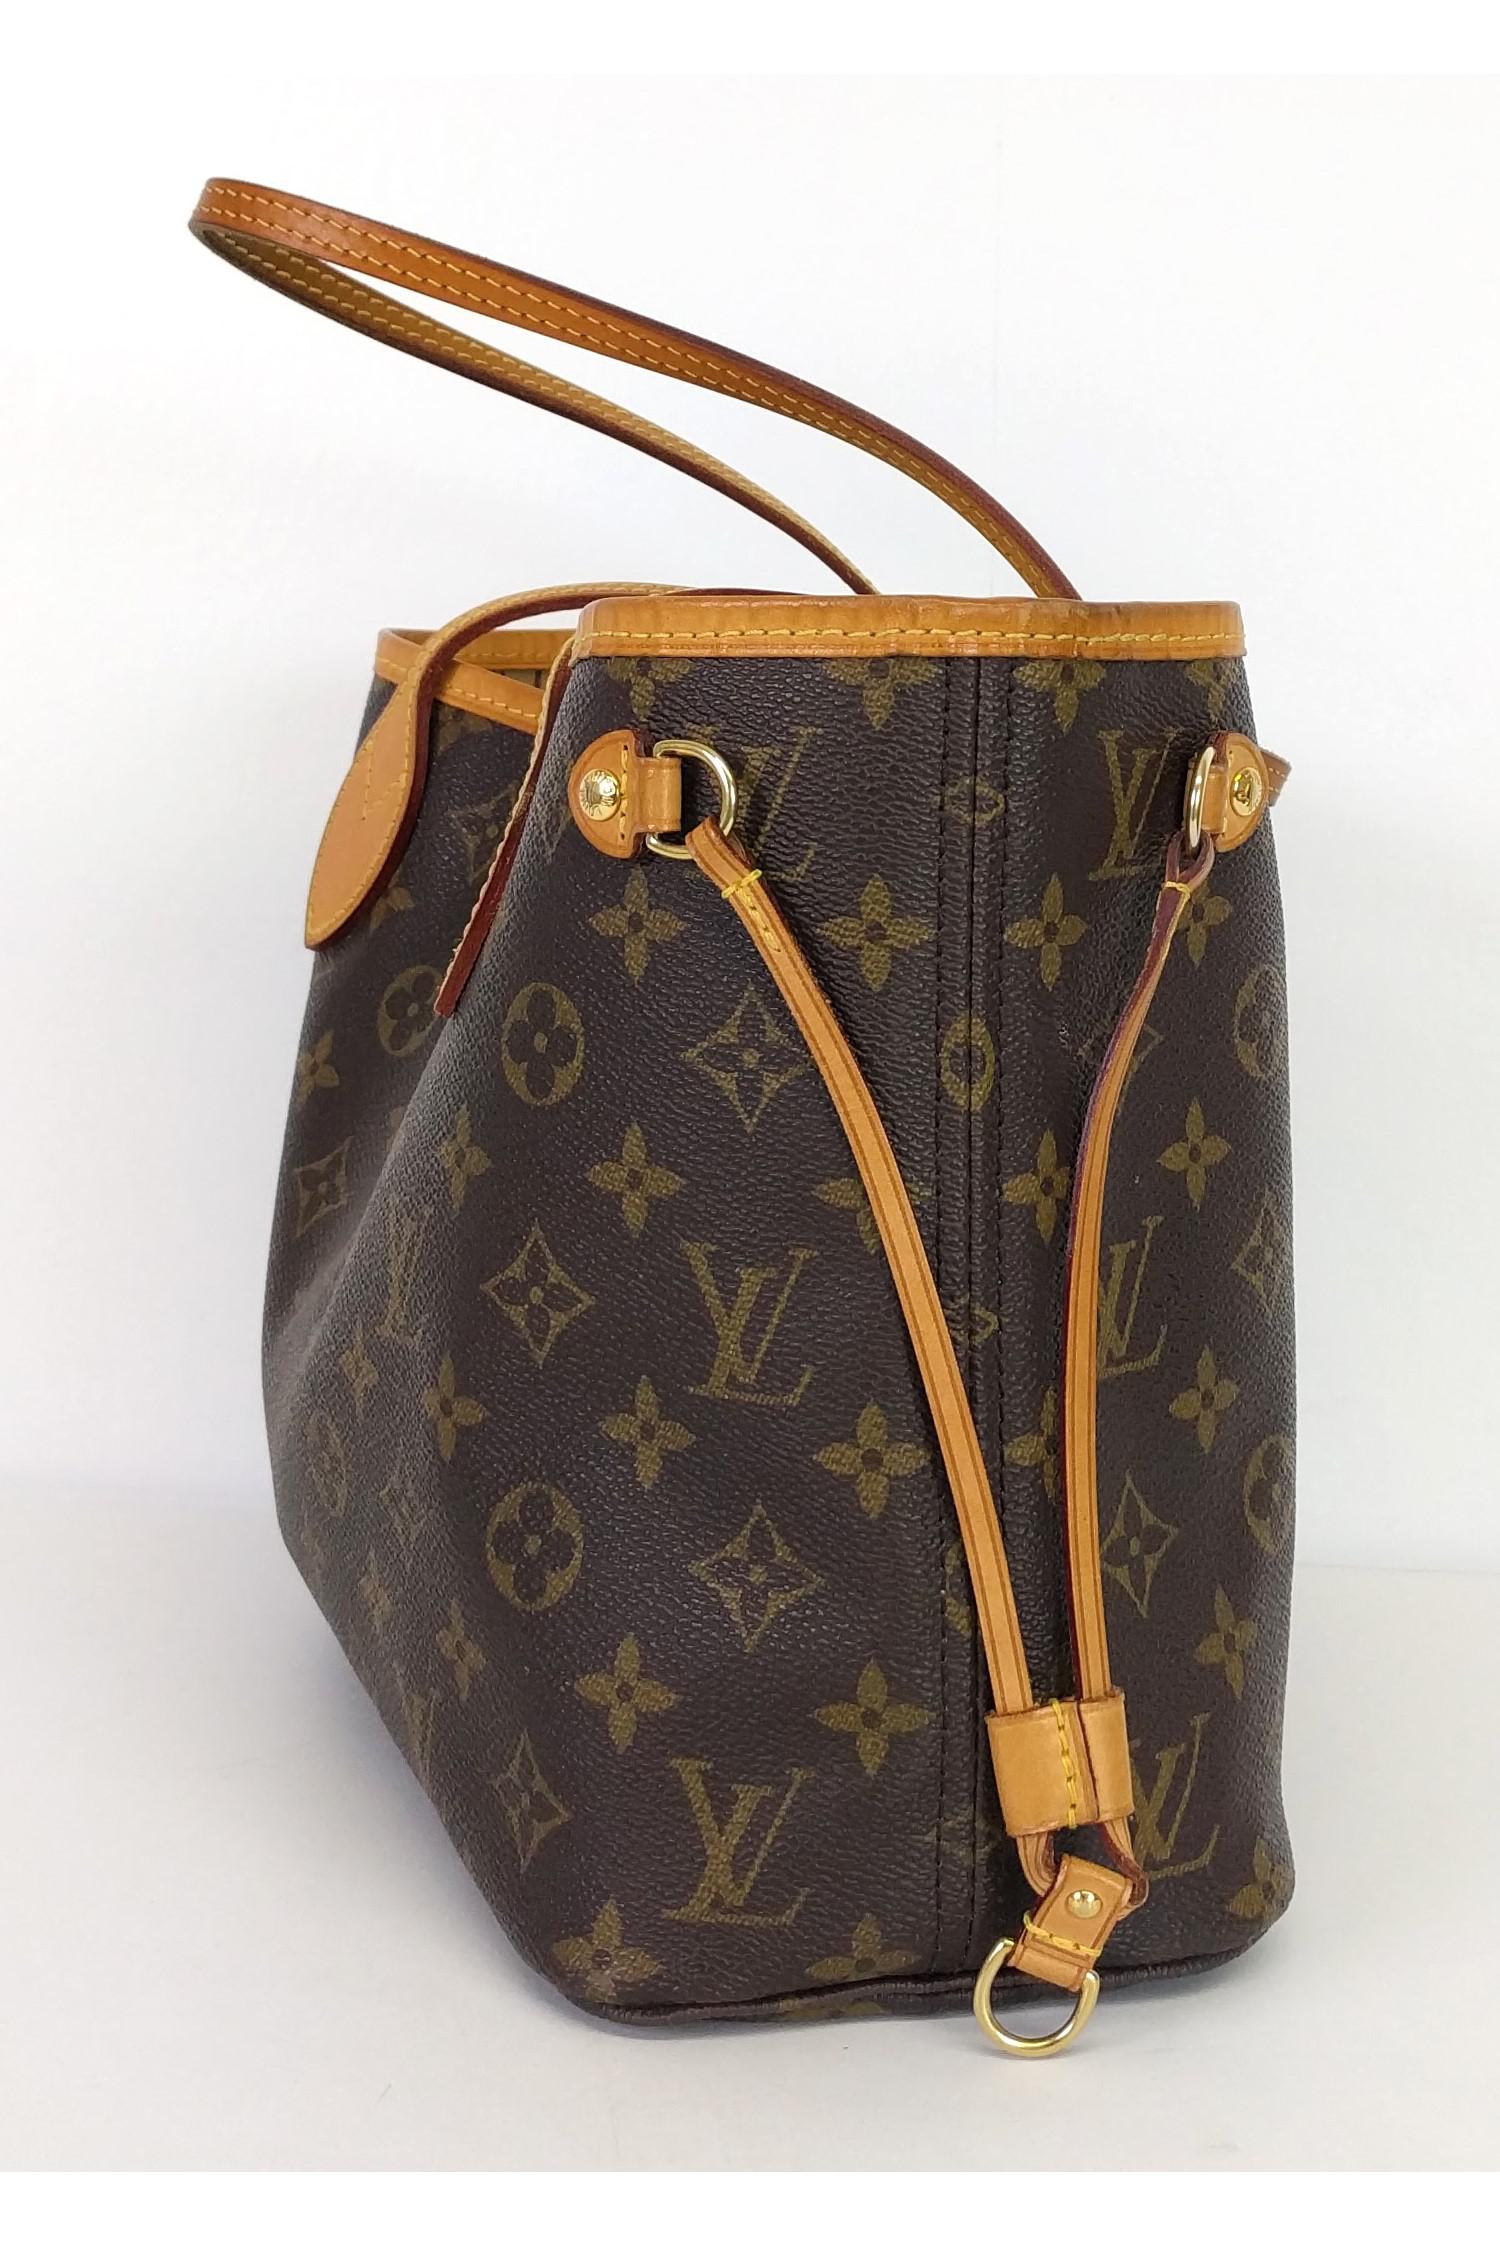 Louis Vuitton Monogram Canvas Neverfull Pm Bag in Brown - Lyst